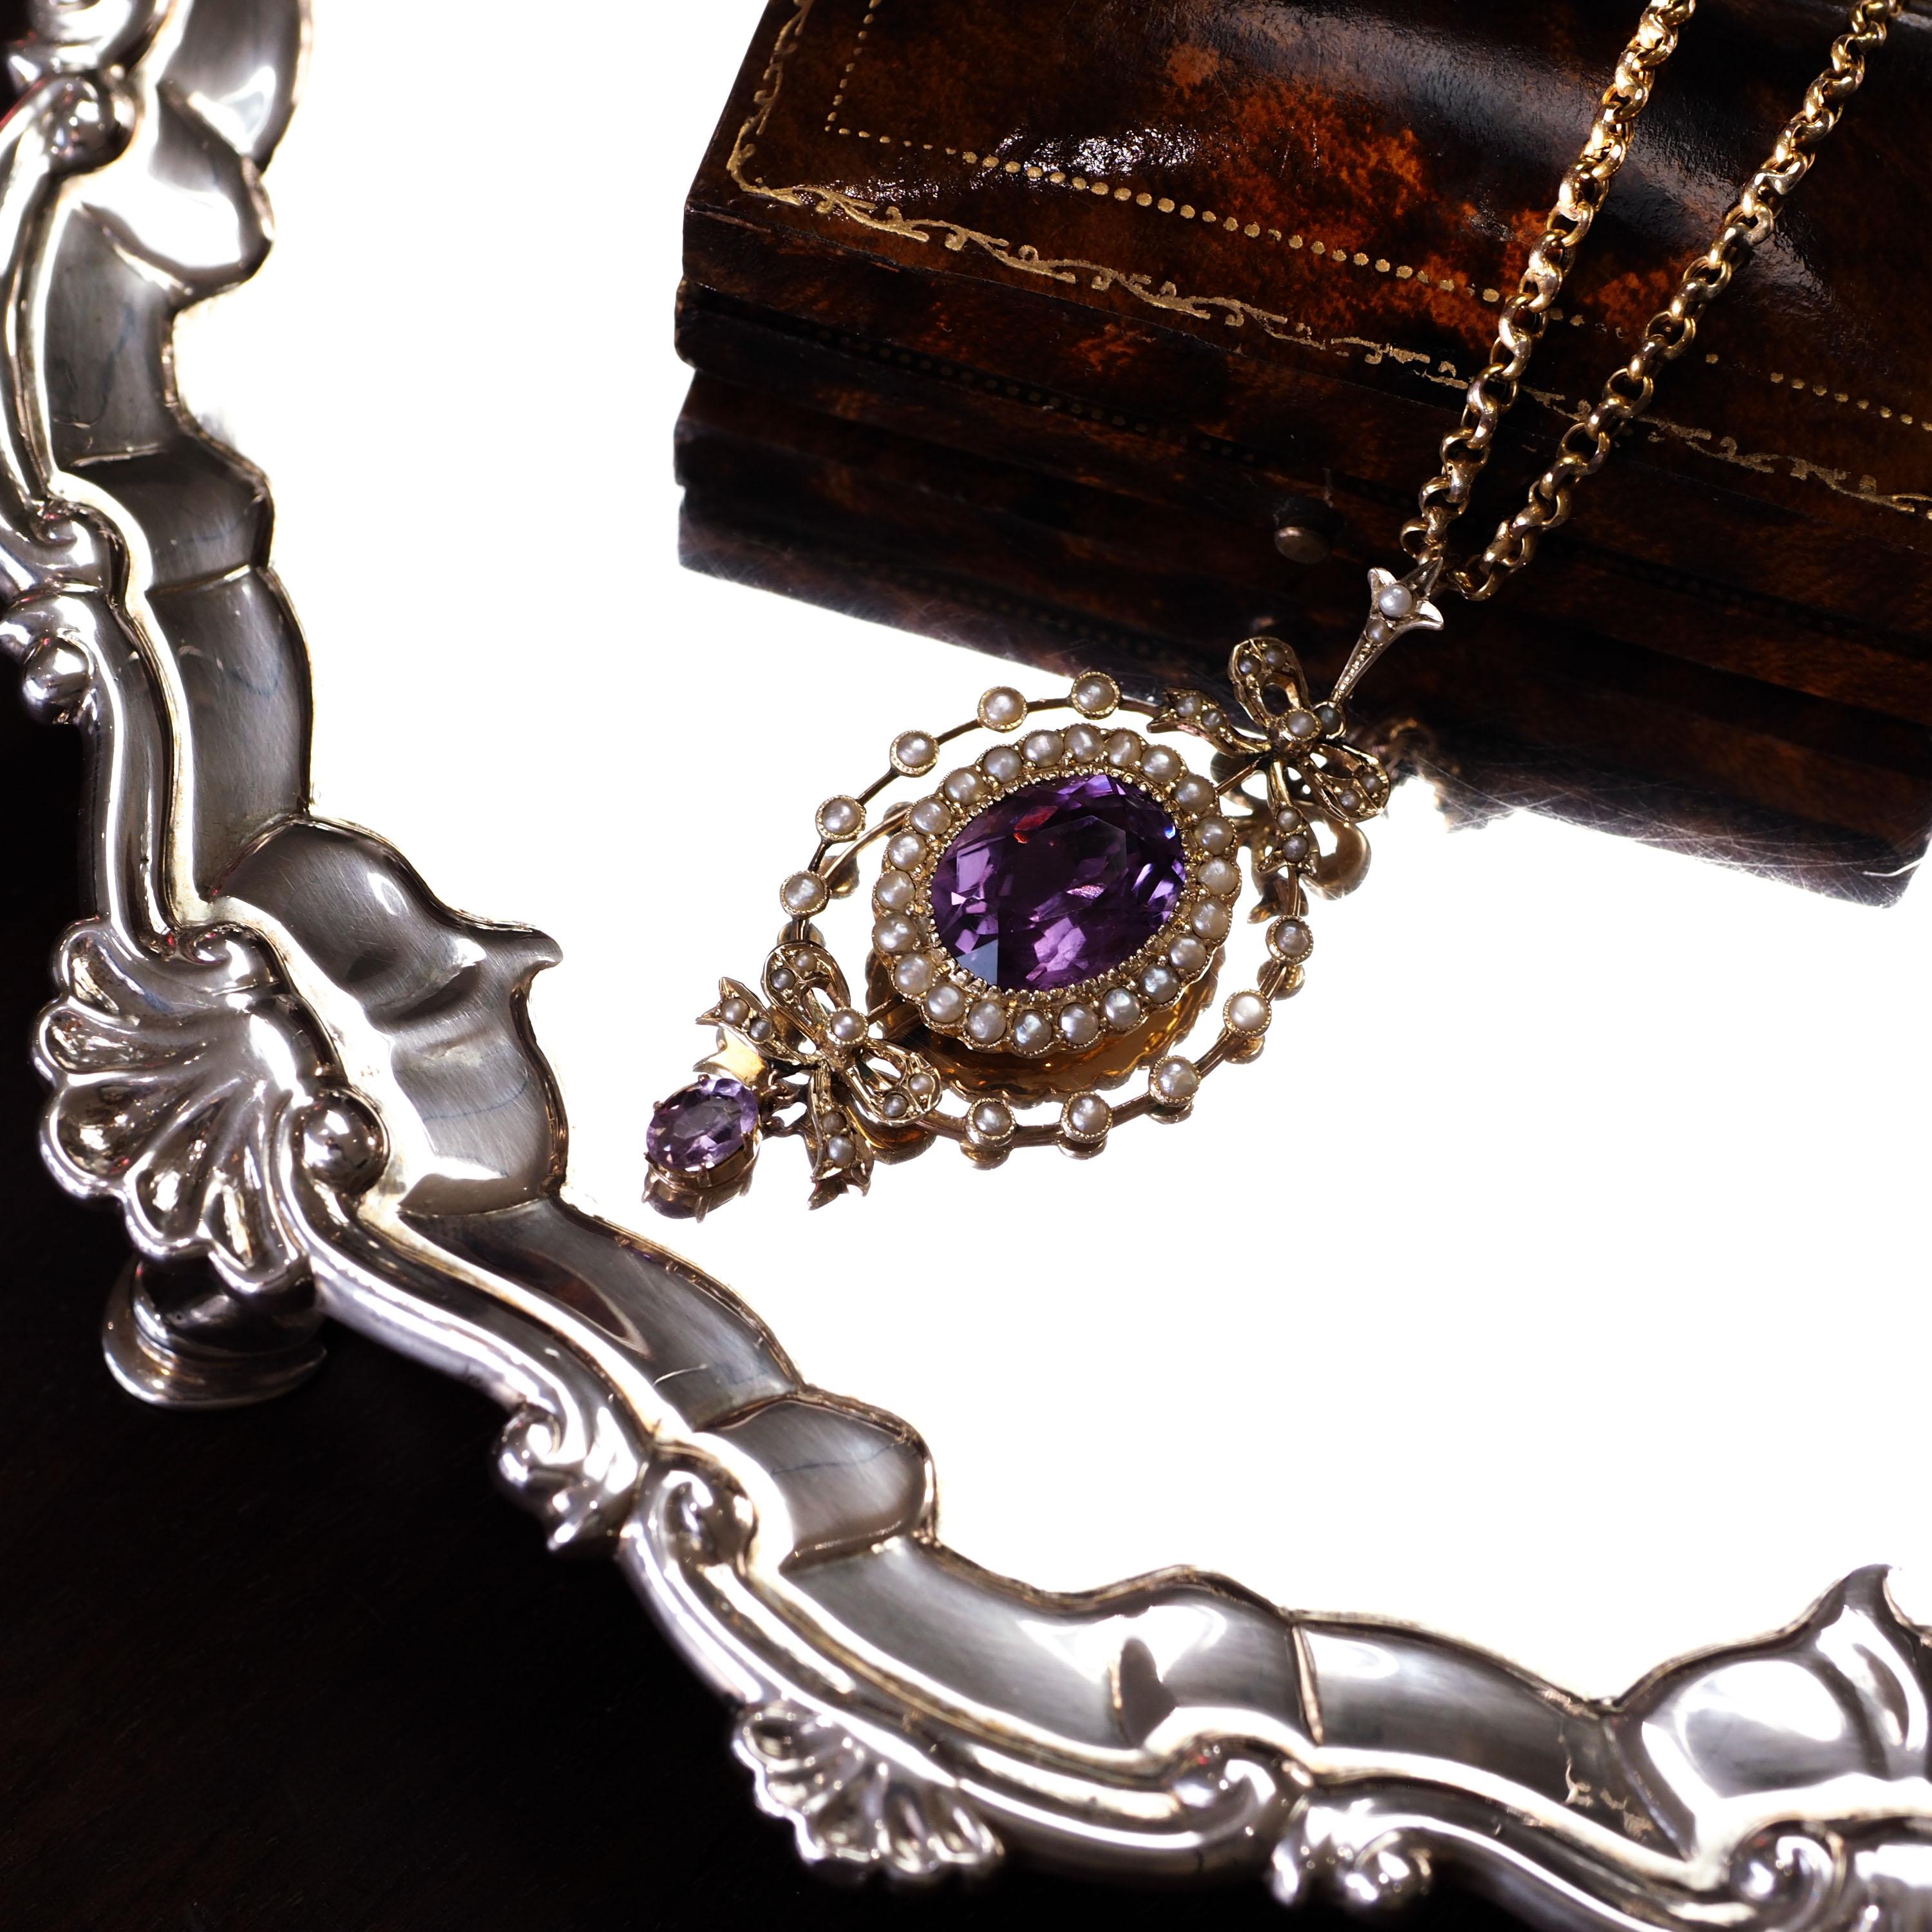 Oval Cut Antique Edwardian Amethyst & Seed Pearl 9k Gold Necklace Pendant, circa 1905